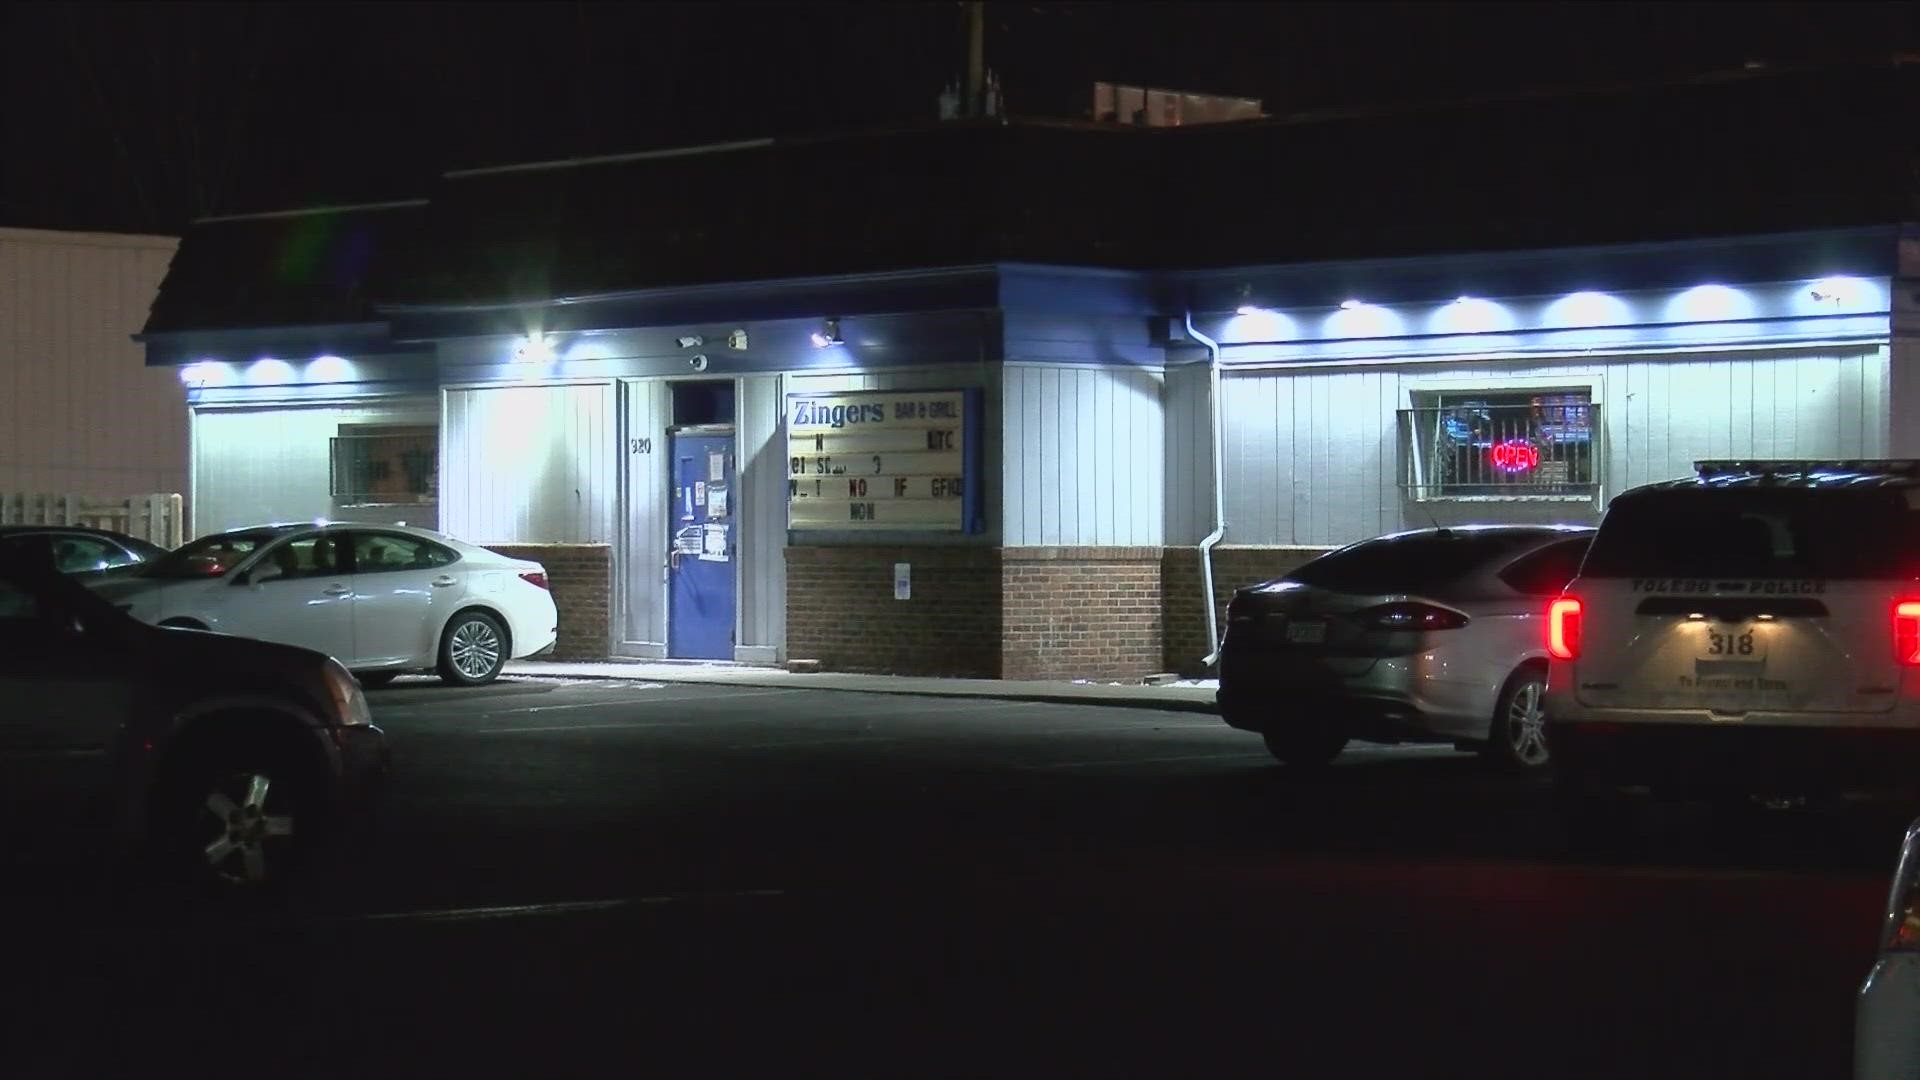 Toledo Police received a call around 11:45 p.m. about a person shot at Zingers Bar & Grill in north Toledo.